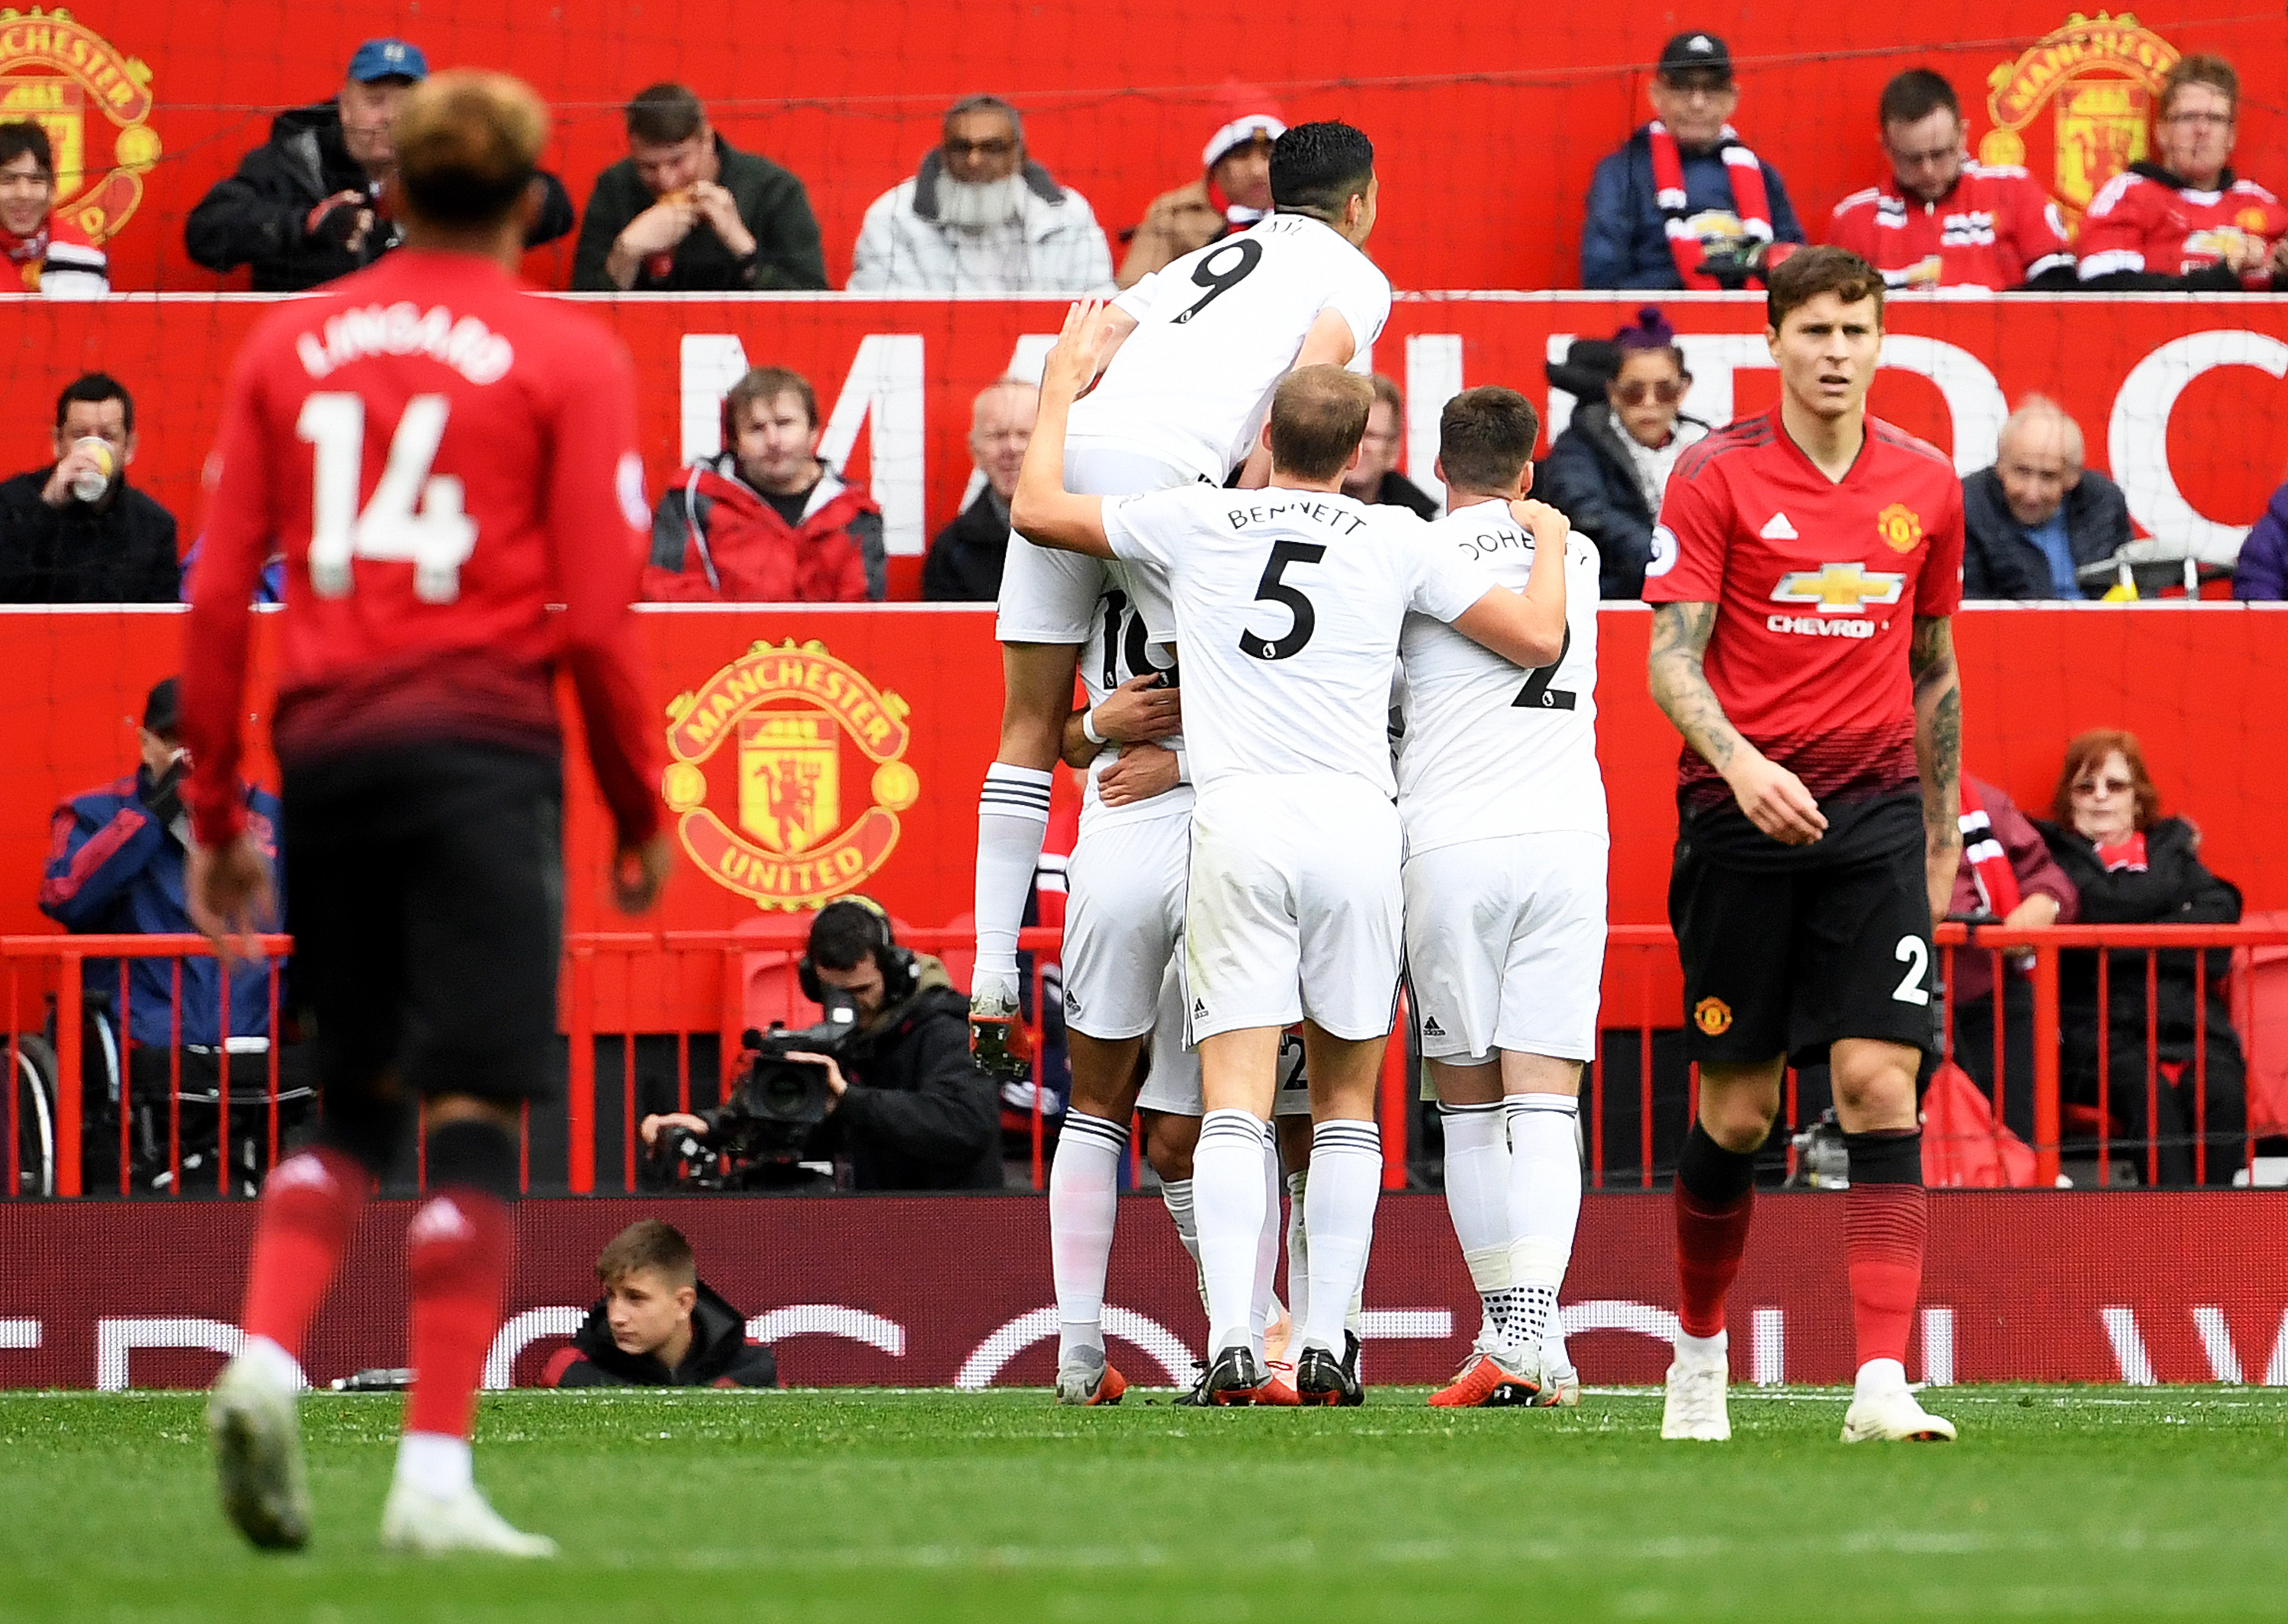 MANCHESTER, ENGLAND - SEPTEMBER 22:  Joao Moutinho of Wolverhampton Wanderers celebrates with teammates after scoring his team's first goal during the Premier League match between Manchester United and Wolverhampton Wanderers at Old Trafford on September 22, 2018 in Manchester, United Kingdom.  (Photo by Ross Kinnaird/Getty Images)